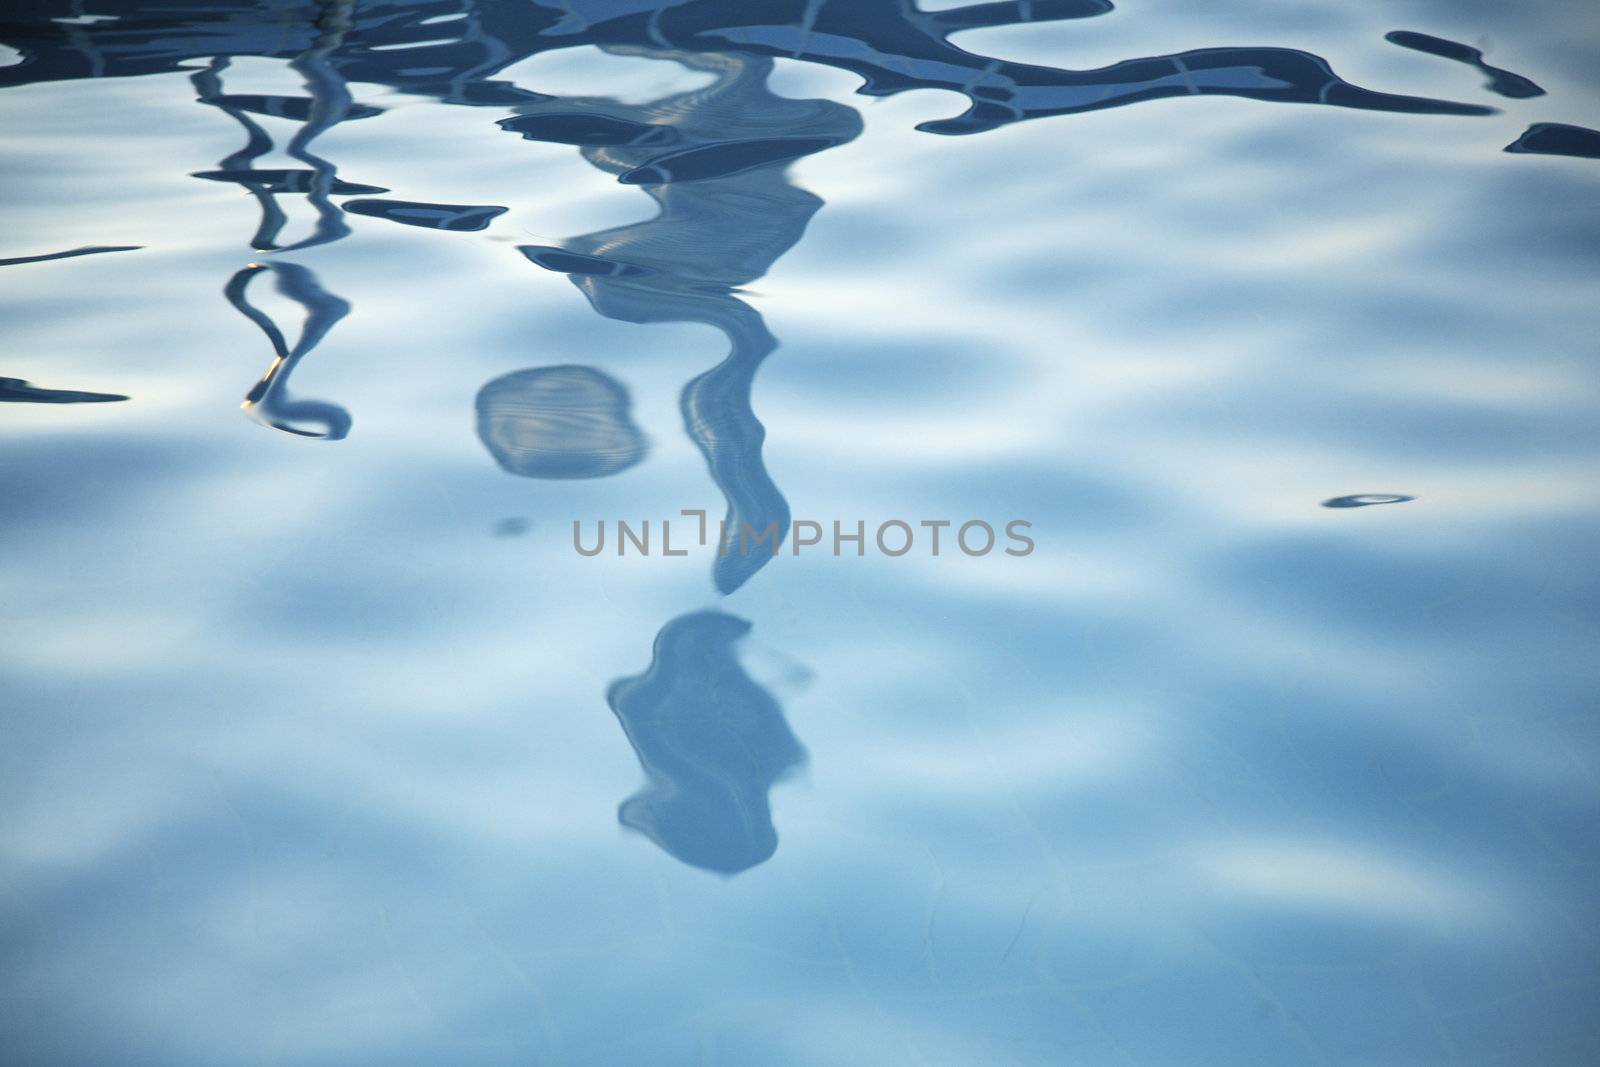 image of a swimming pool surface with reflections